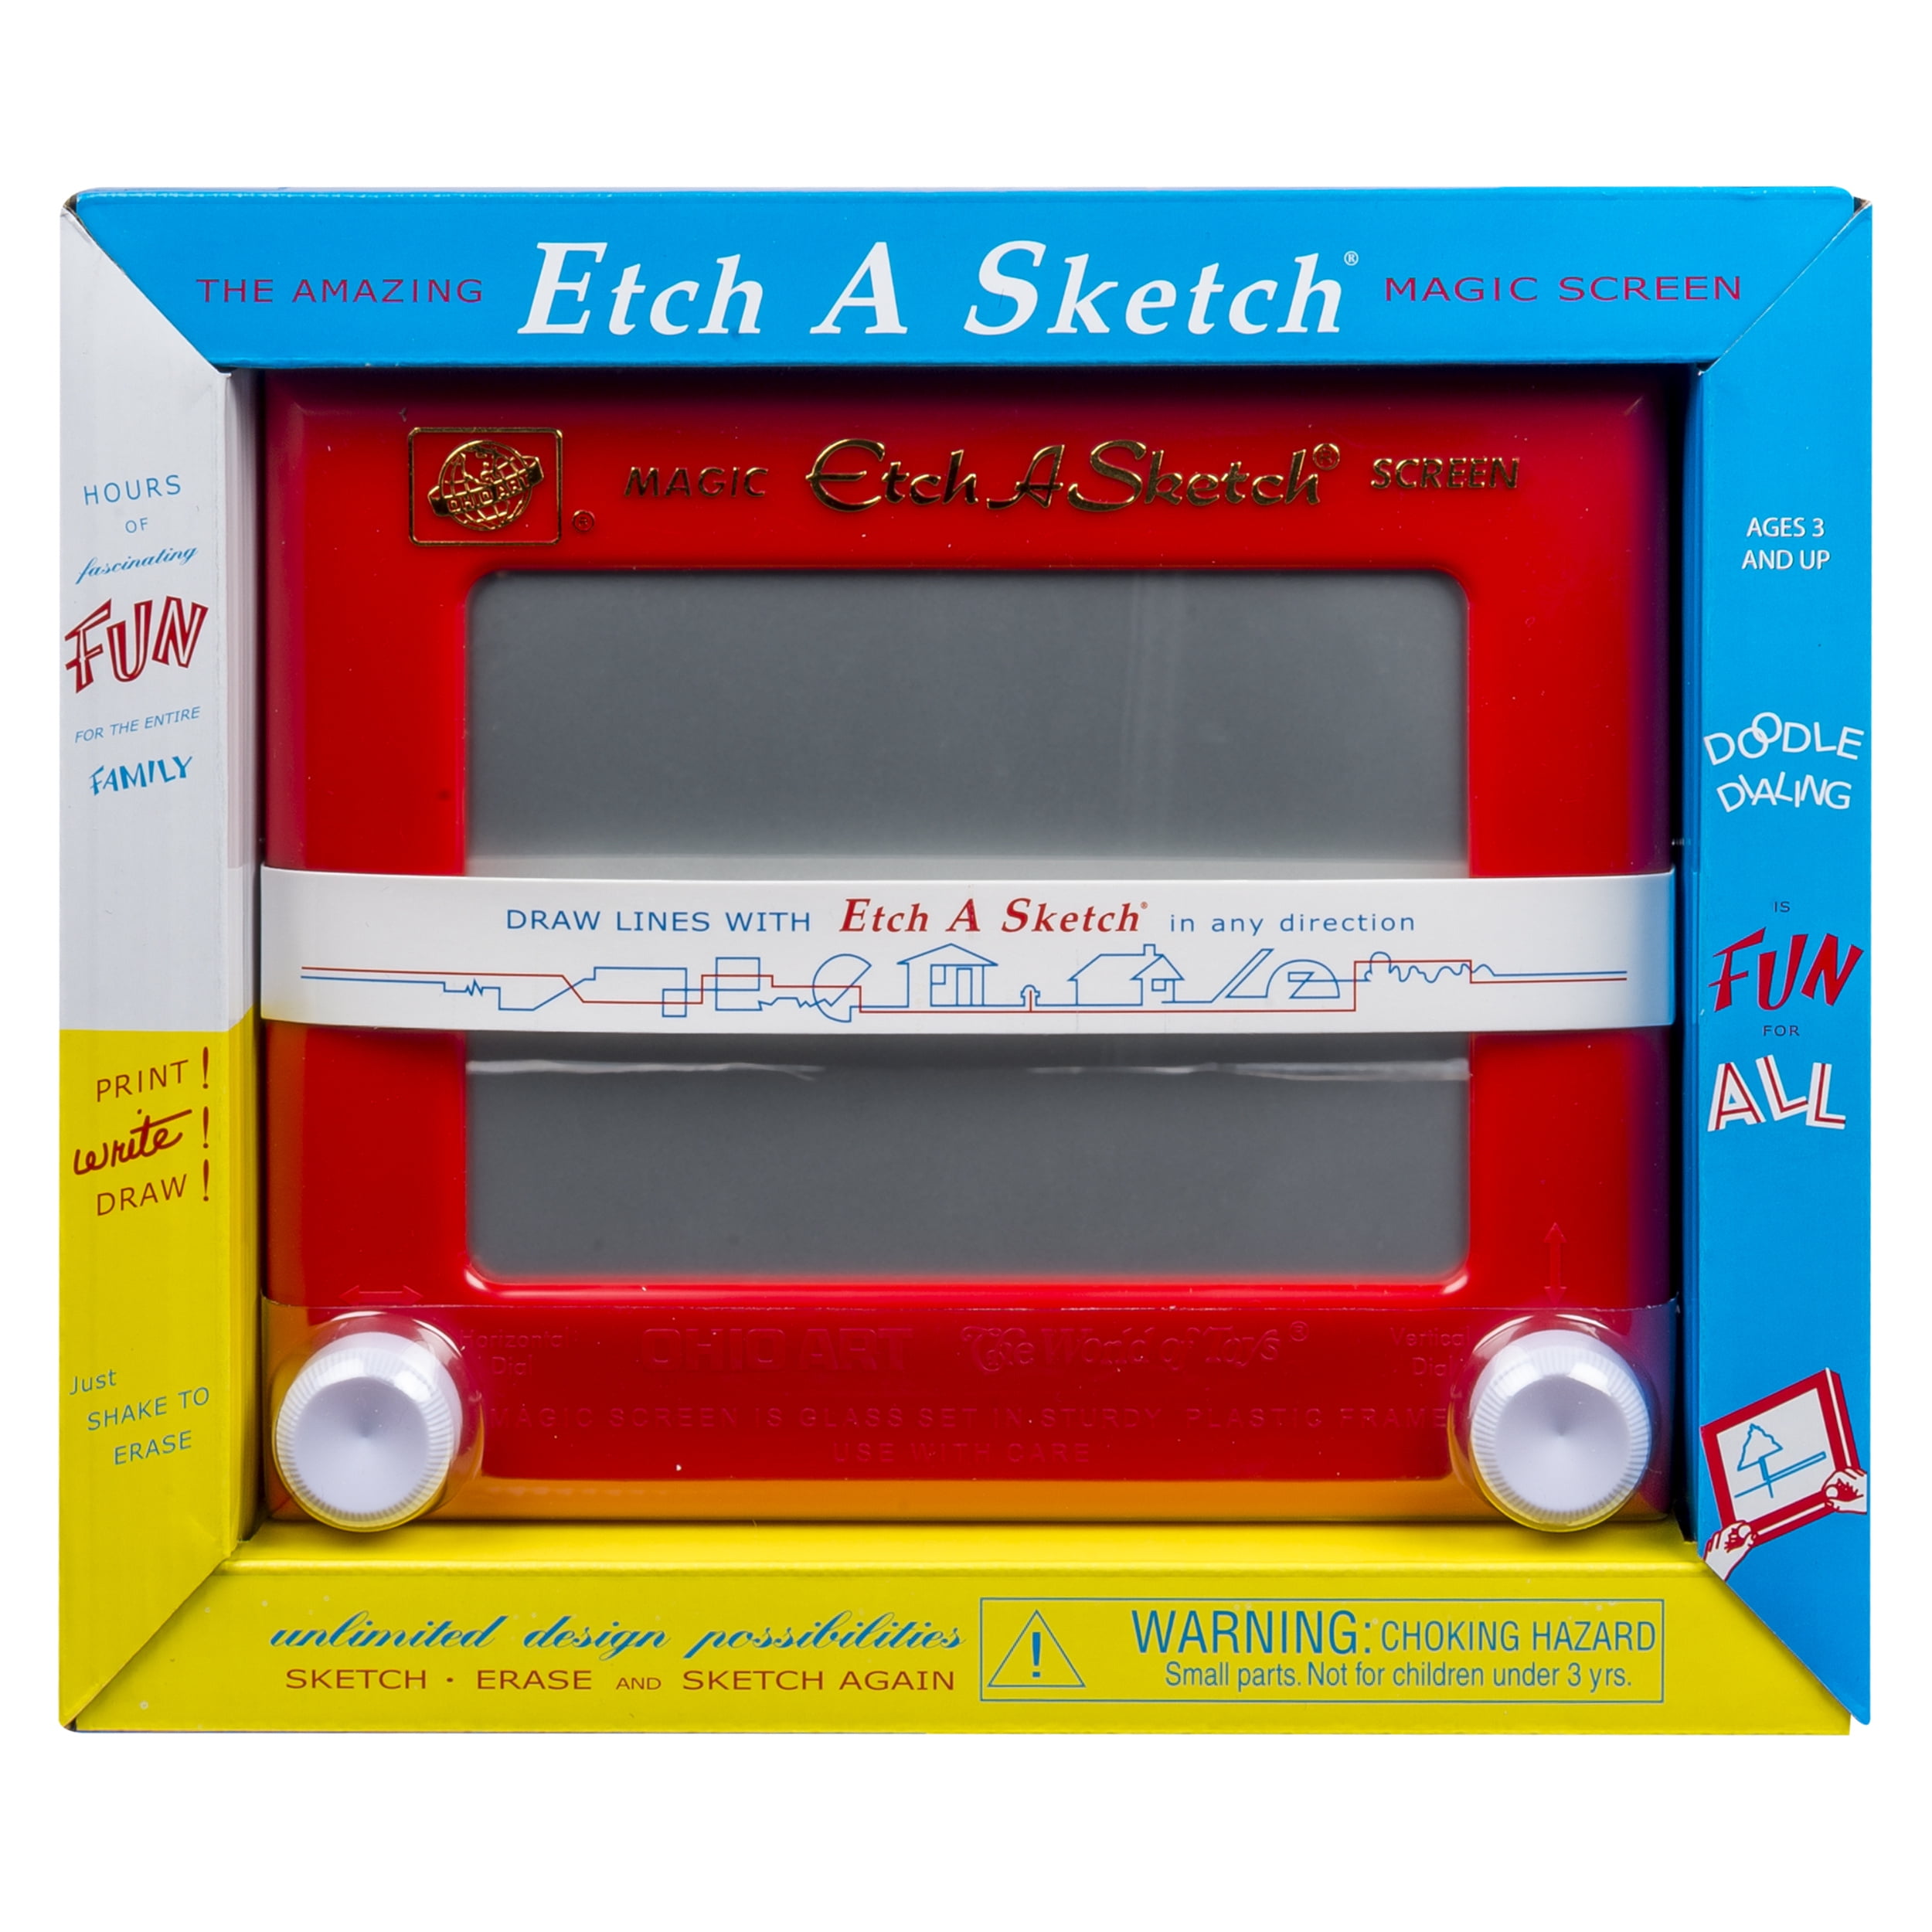 Etch A Sketch Pocket Drawing Toy with Magic Screen for Ages 3 and up  Style May Vary  Walmartcom